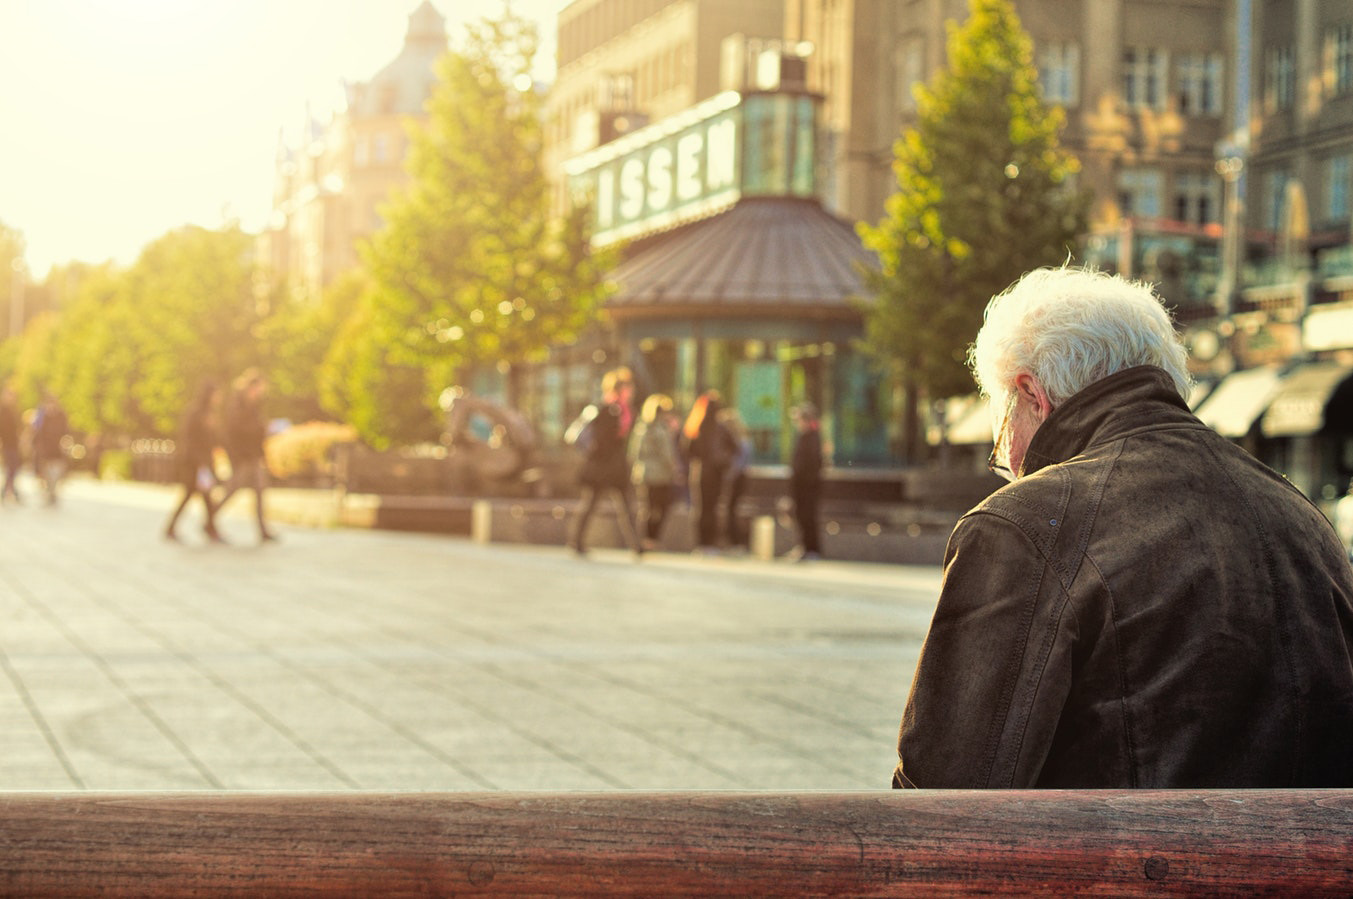 Older man sitting on bench in a public square.